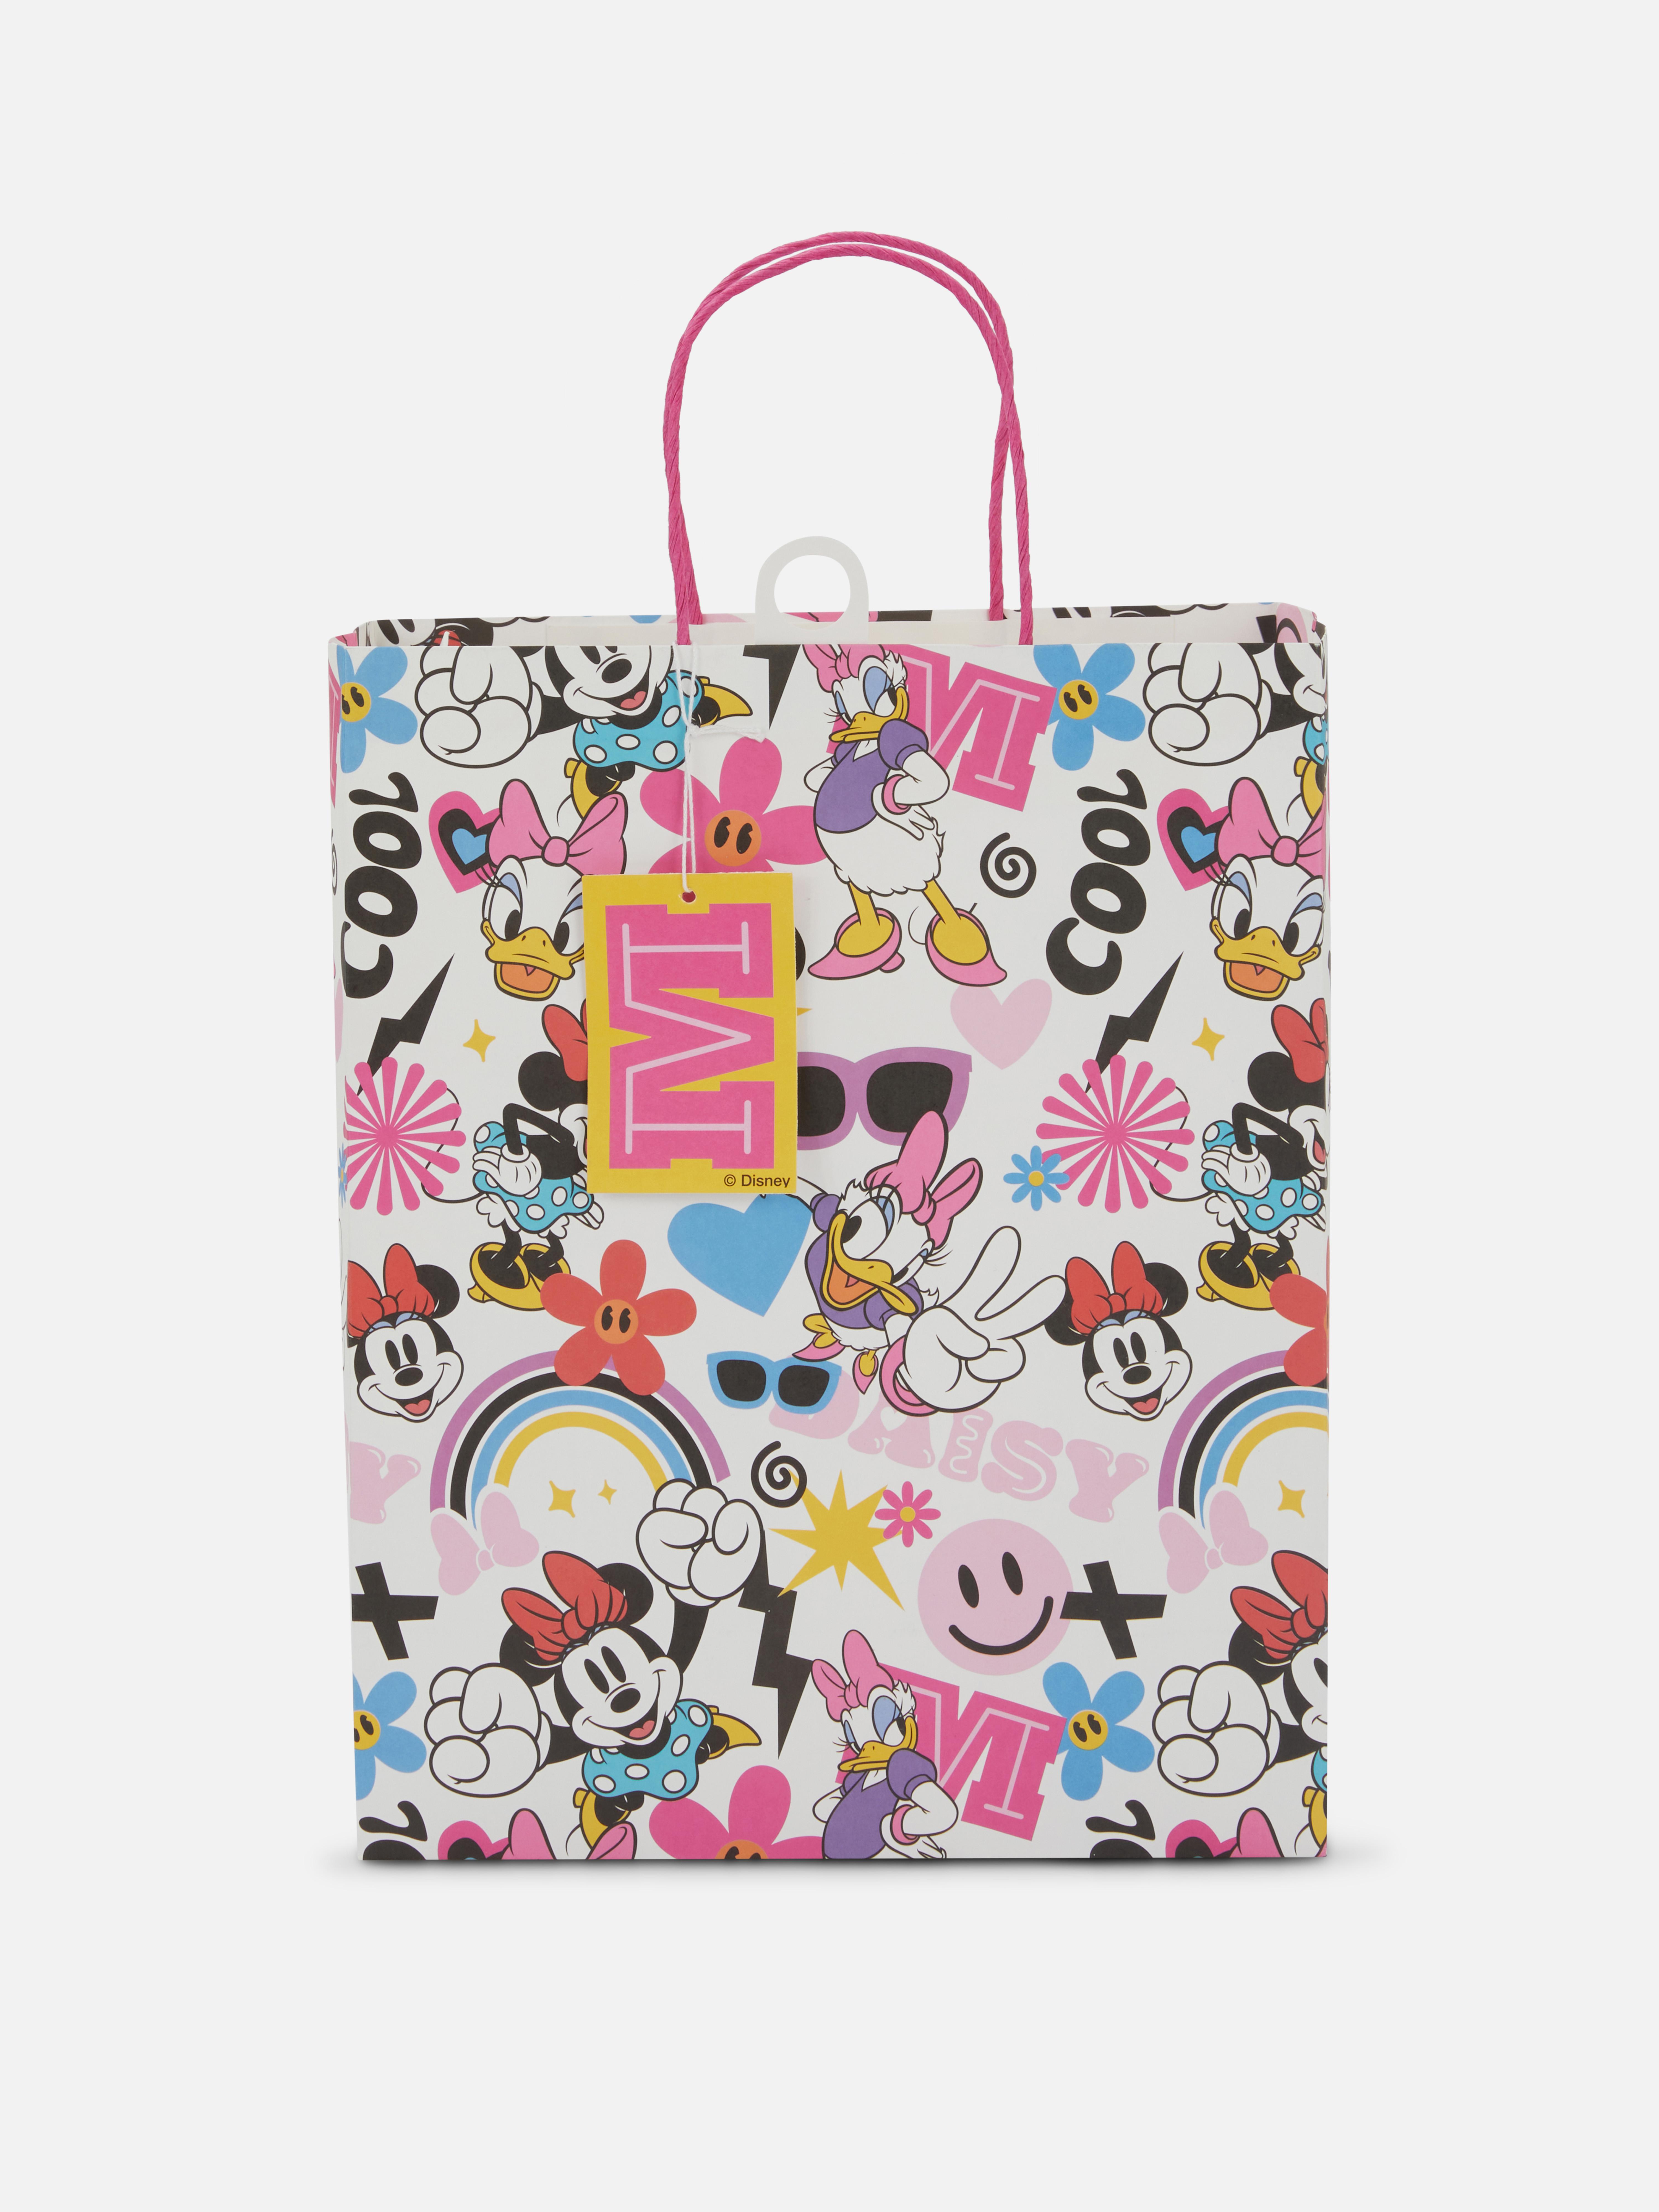 Disney's Minnie Mouse & Friends Printed Gift Bag